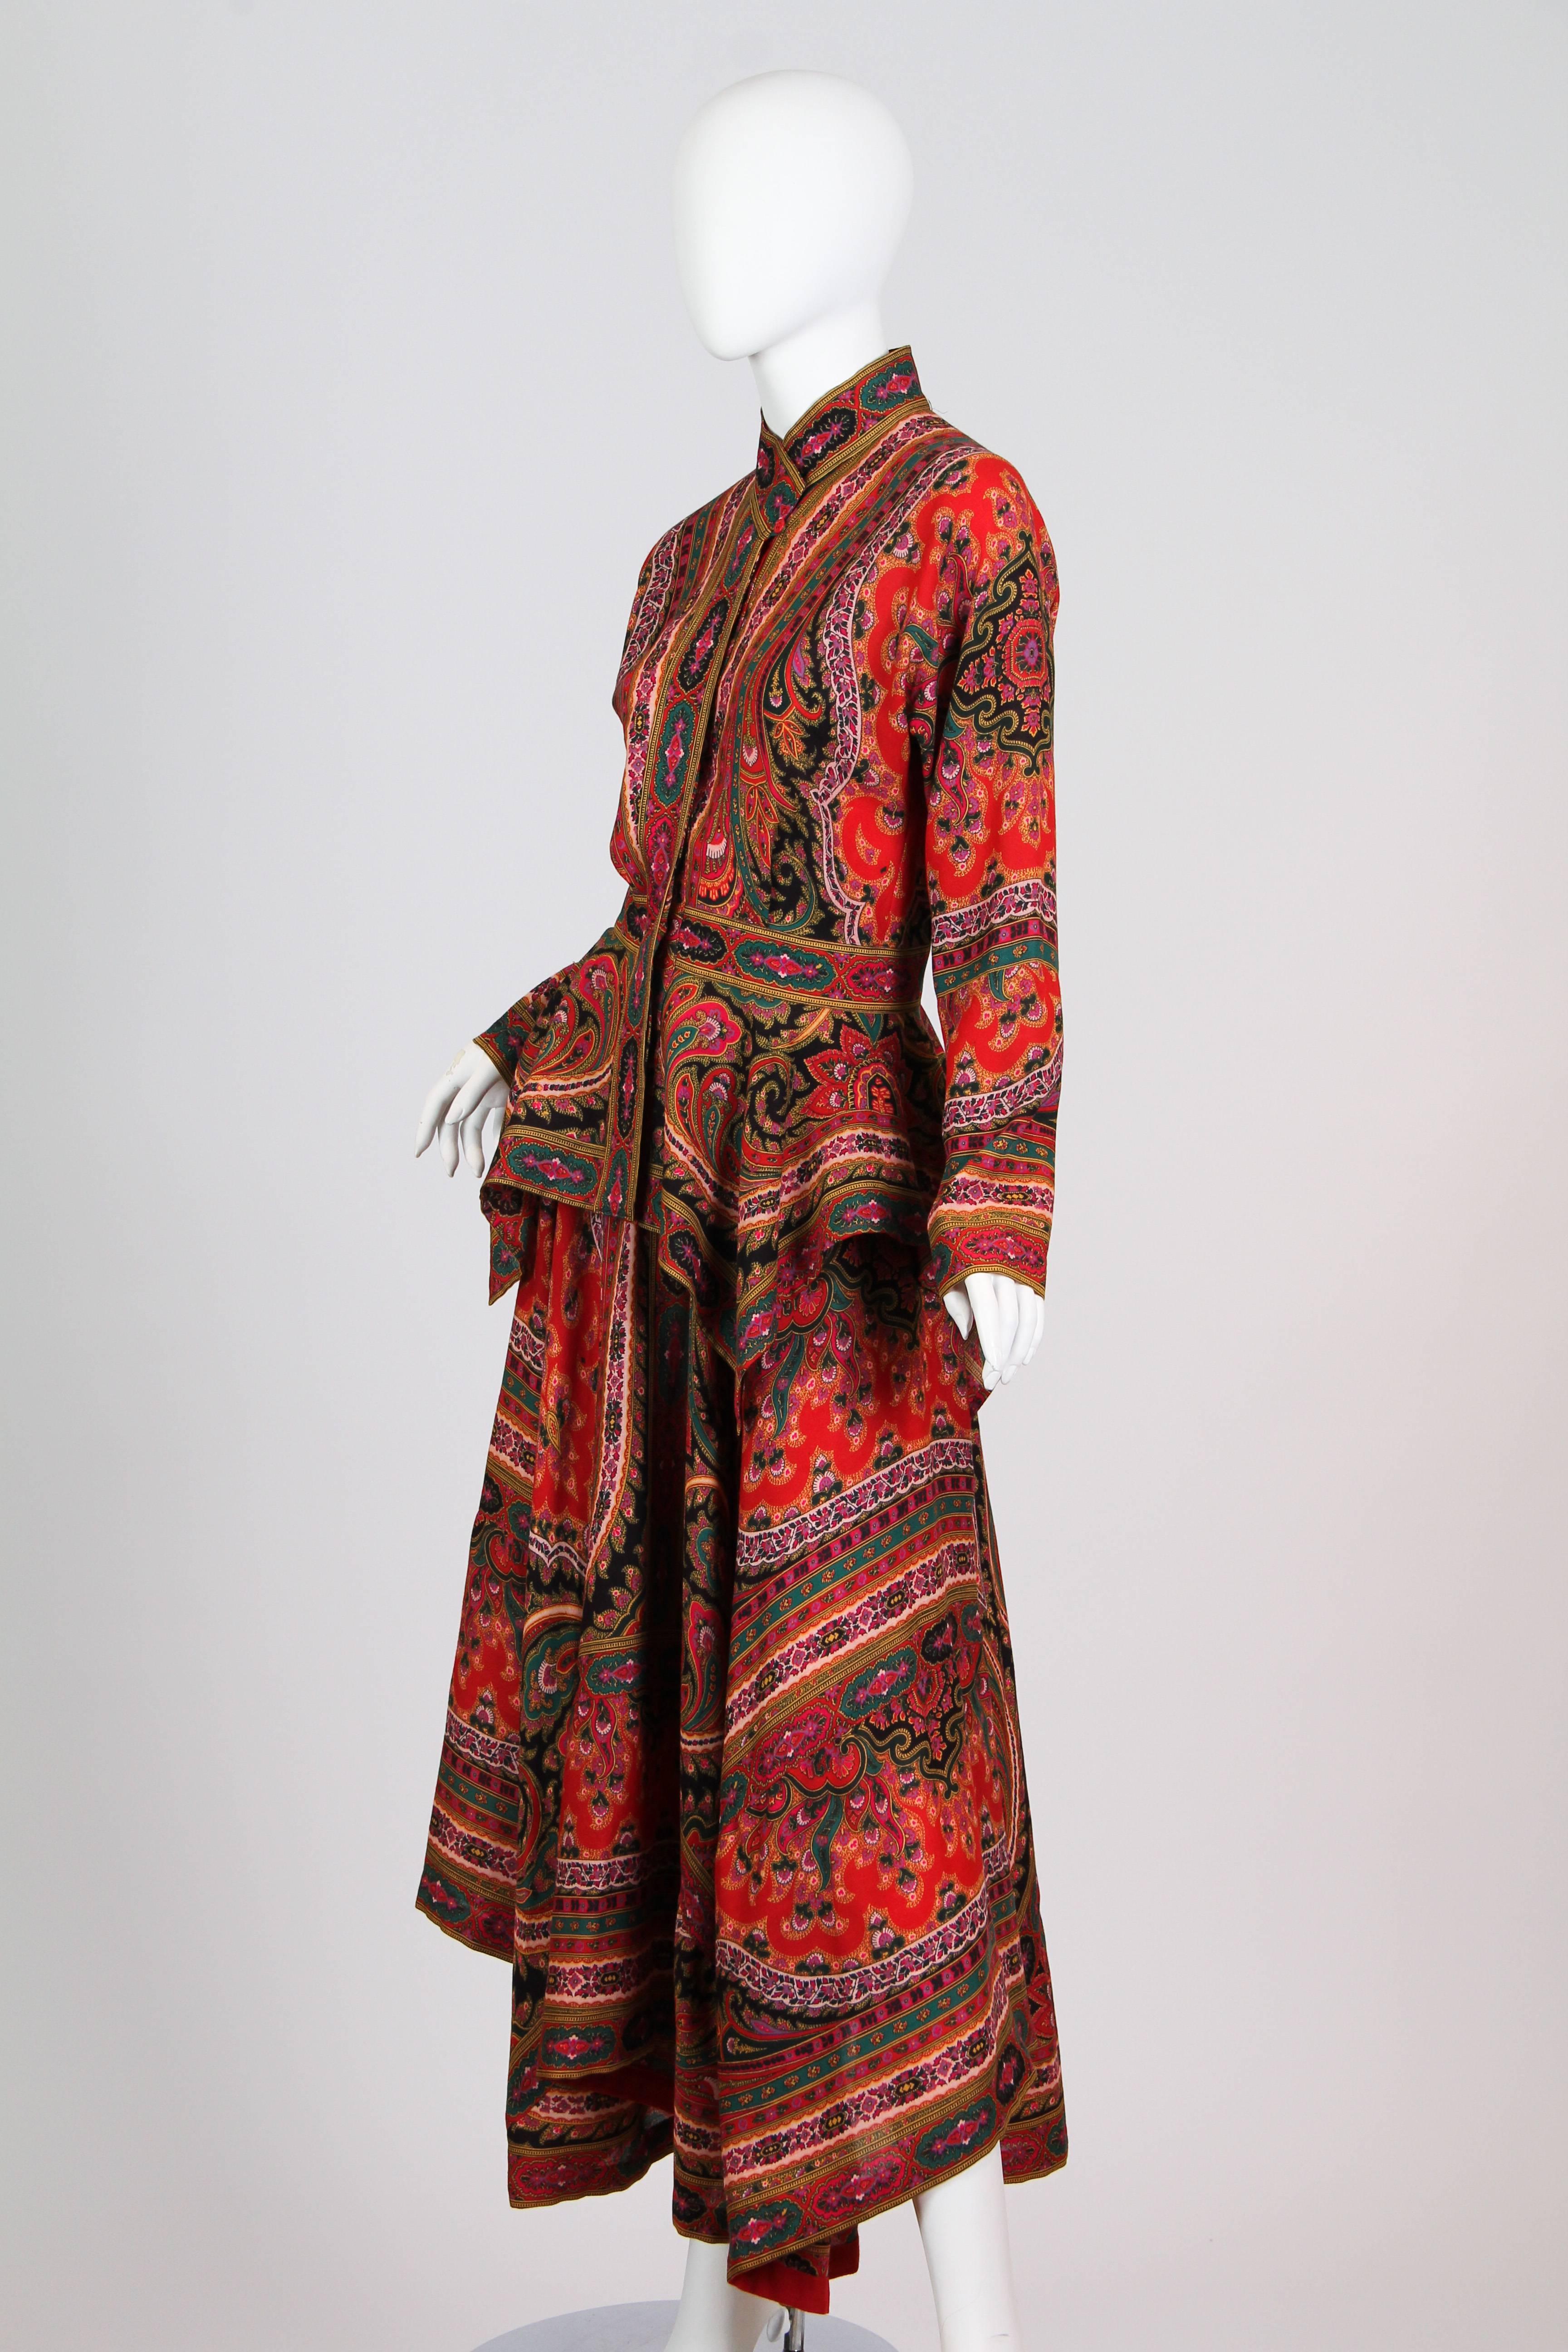 This is a wonderful jacket and skirt suit by Kenzo Paris. Made of a richly colored and complexly patterned wool twill print, it is reminiscent of the beautiful paisley wrapping gowns of the late Victorian period, which were made out of sumptuous